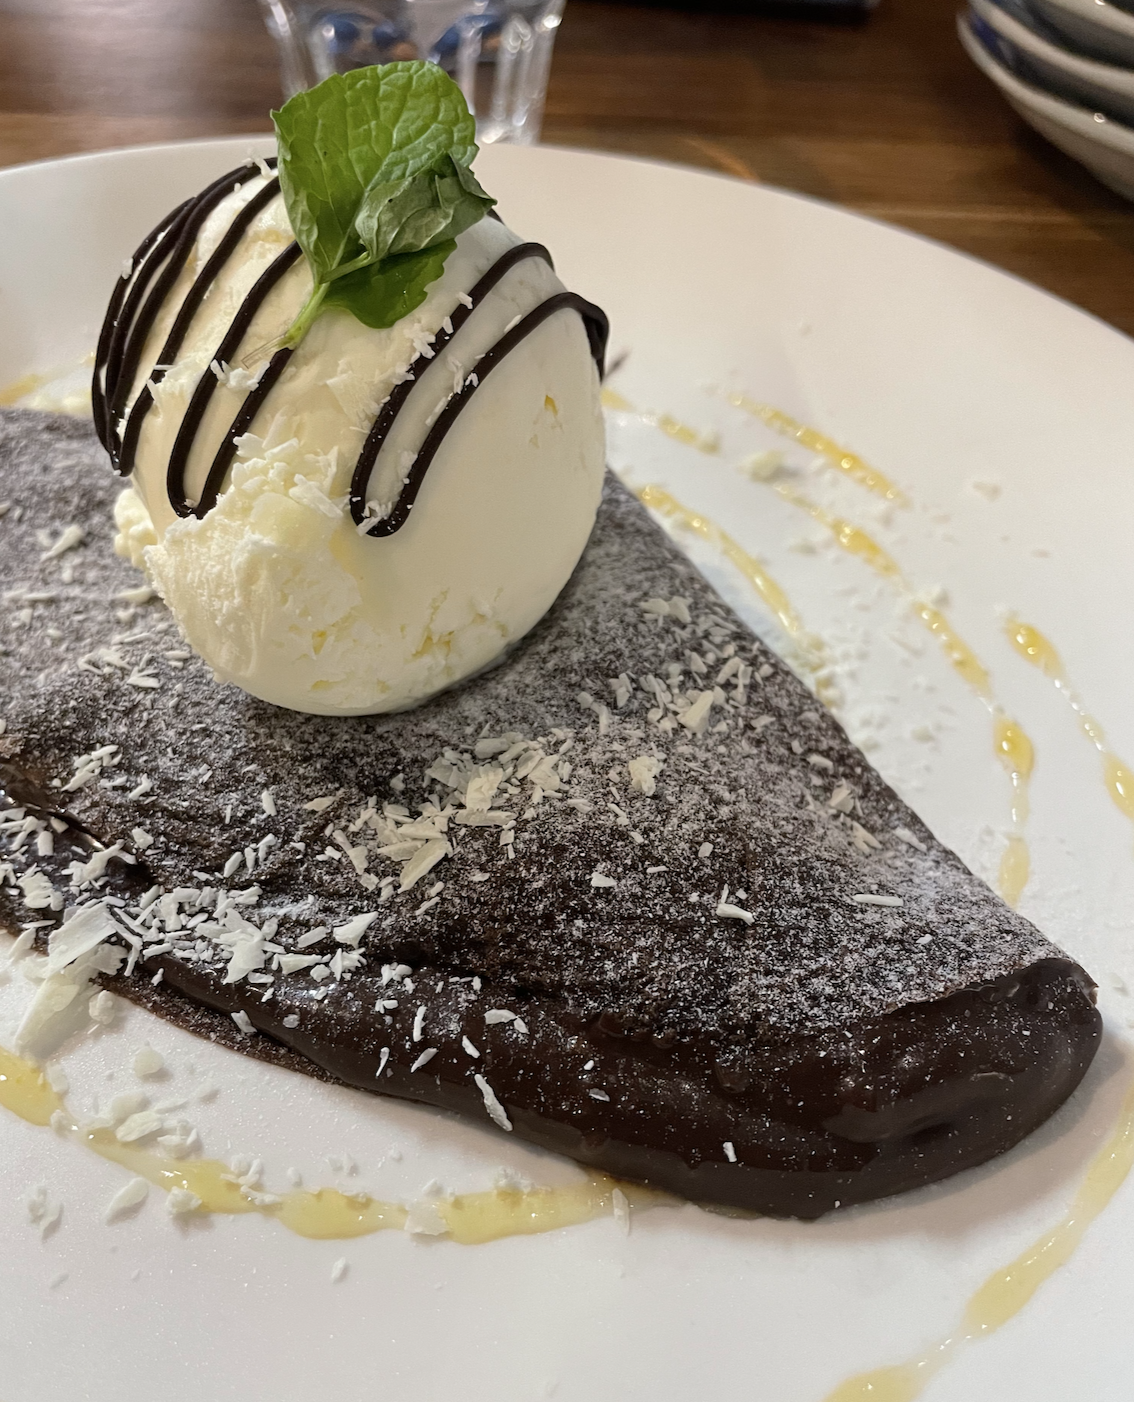 A photo of a chocolate crepe, stuffed with chocolate sauce and topped with vanilla ice cream.